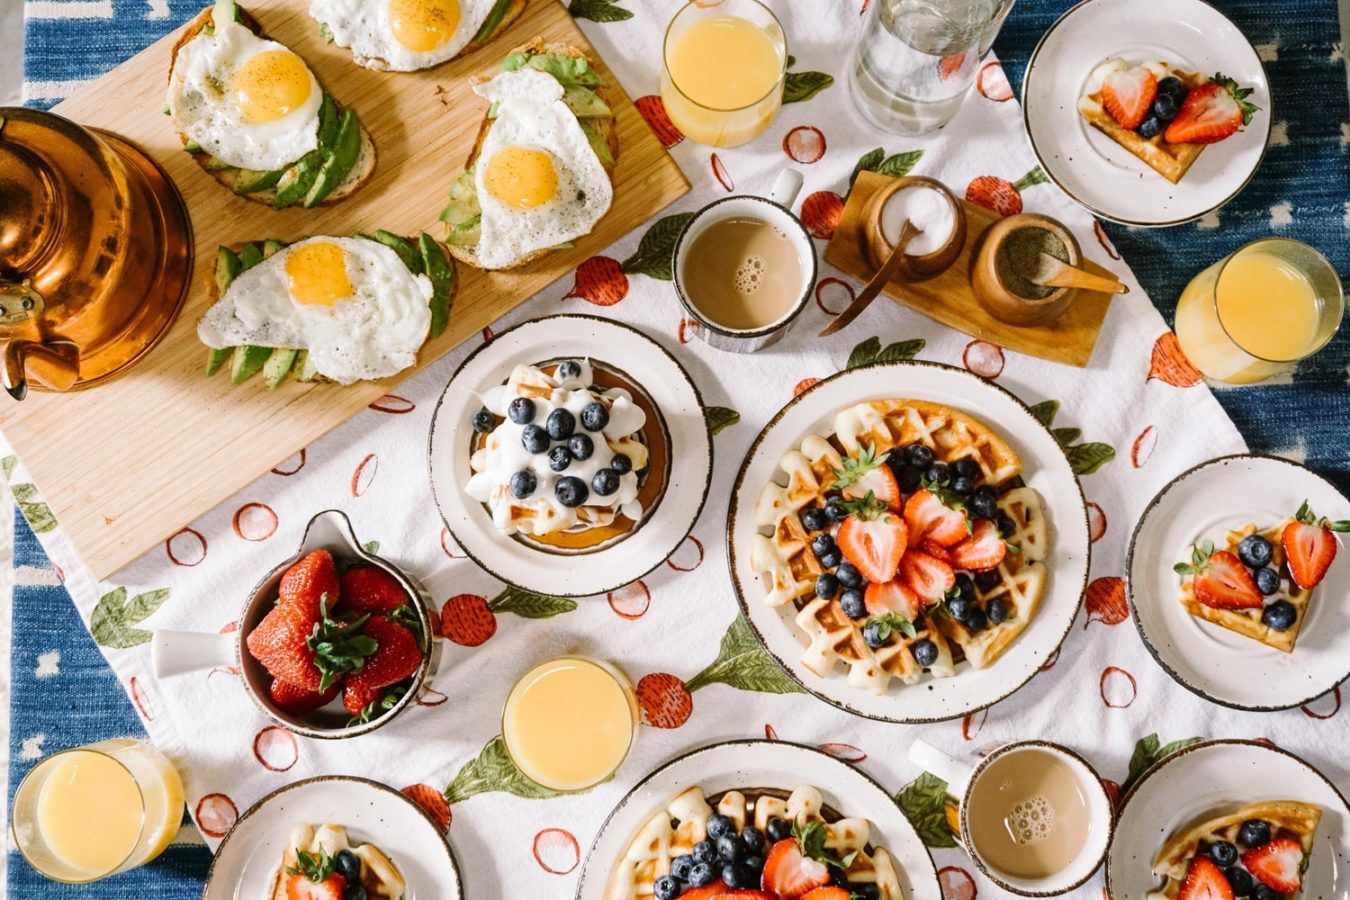 These stellar brunch recipes take quarantine mornings to a whole ‘nother level